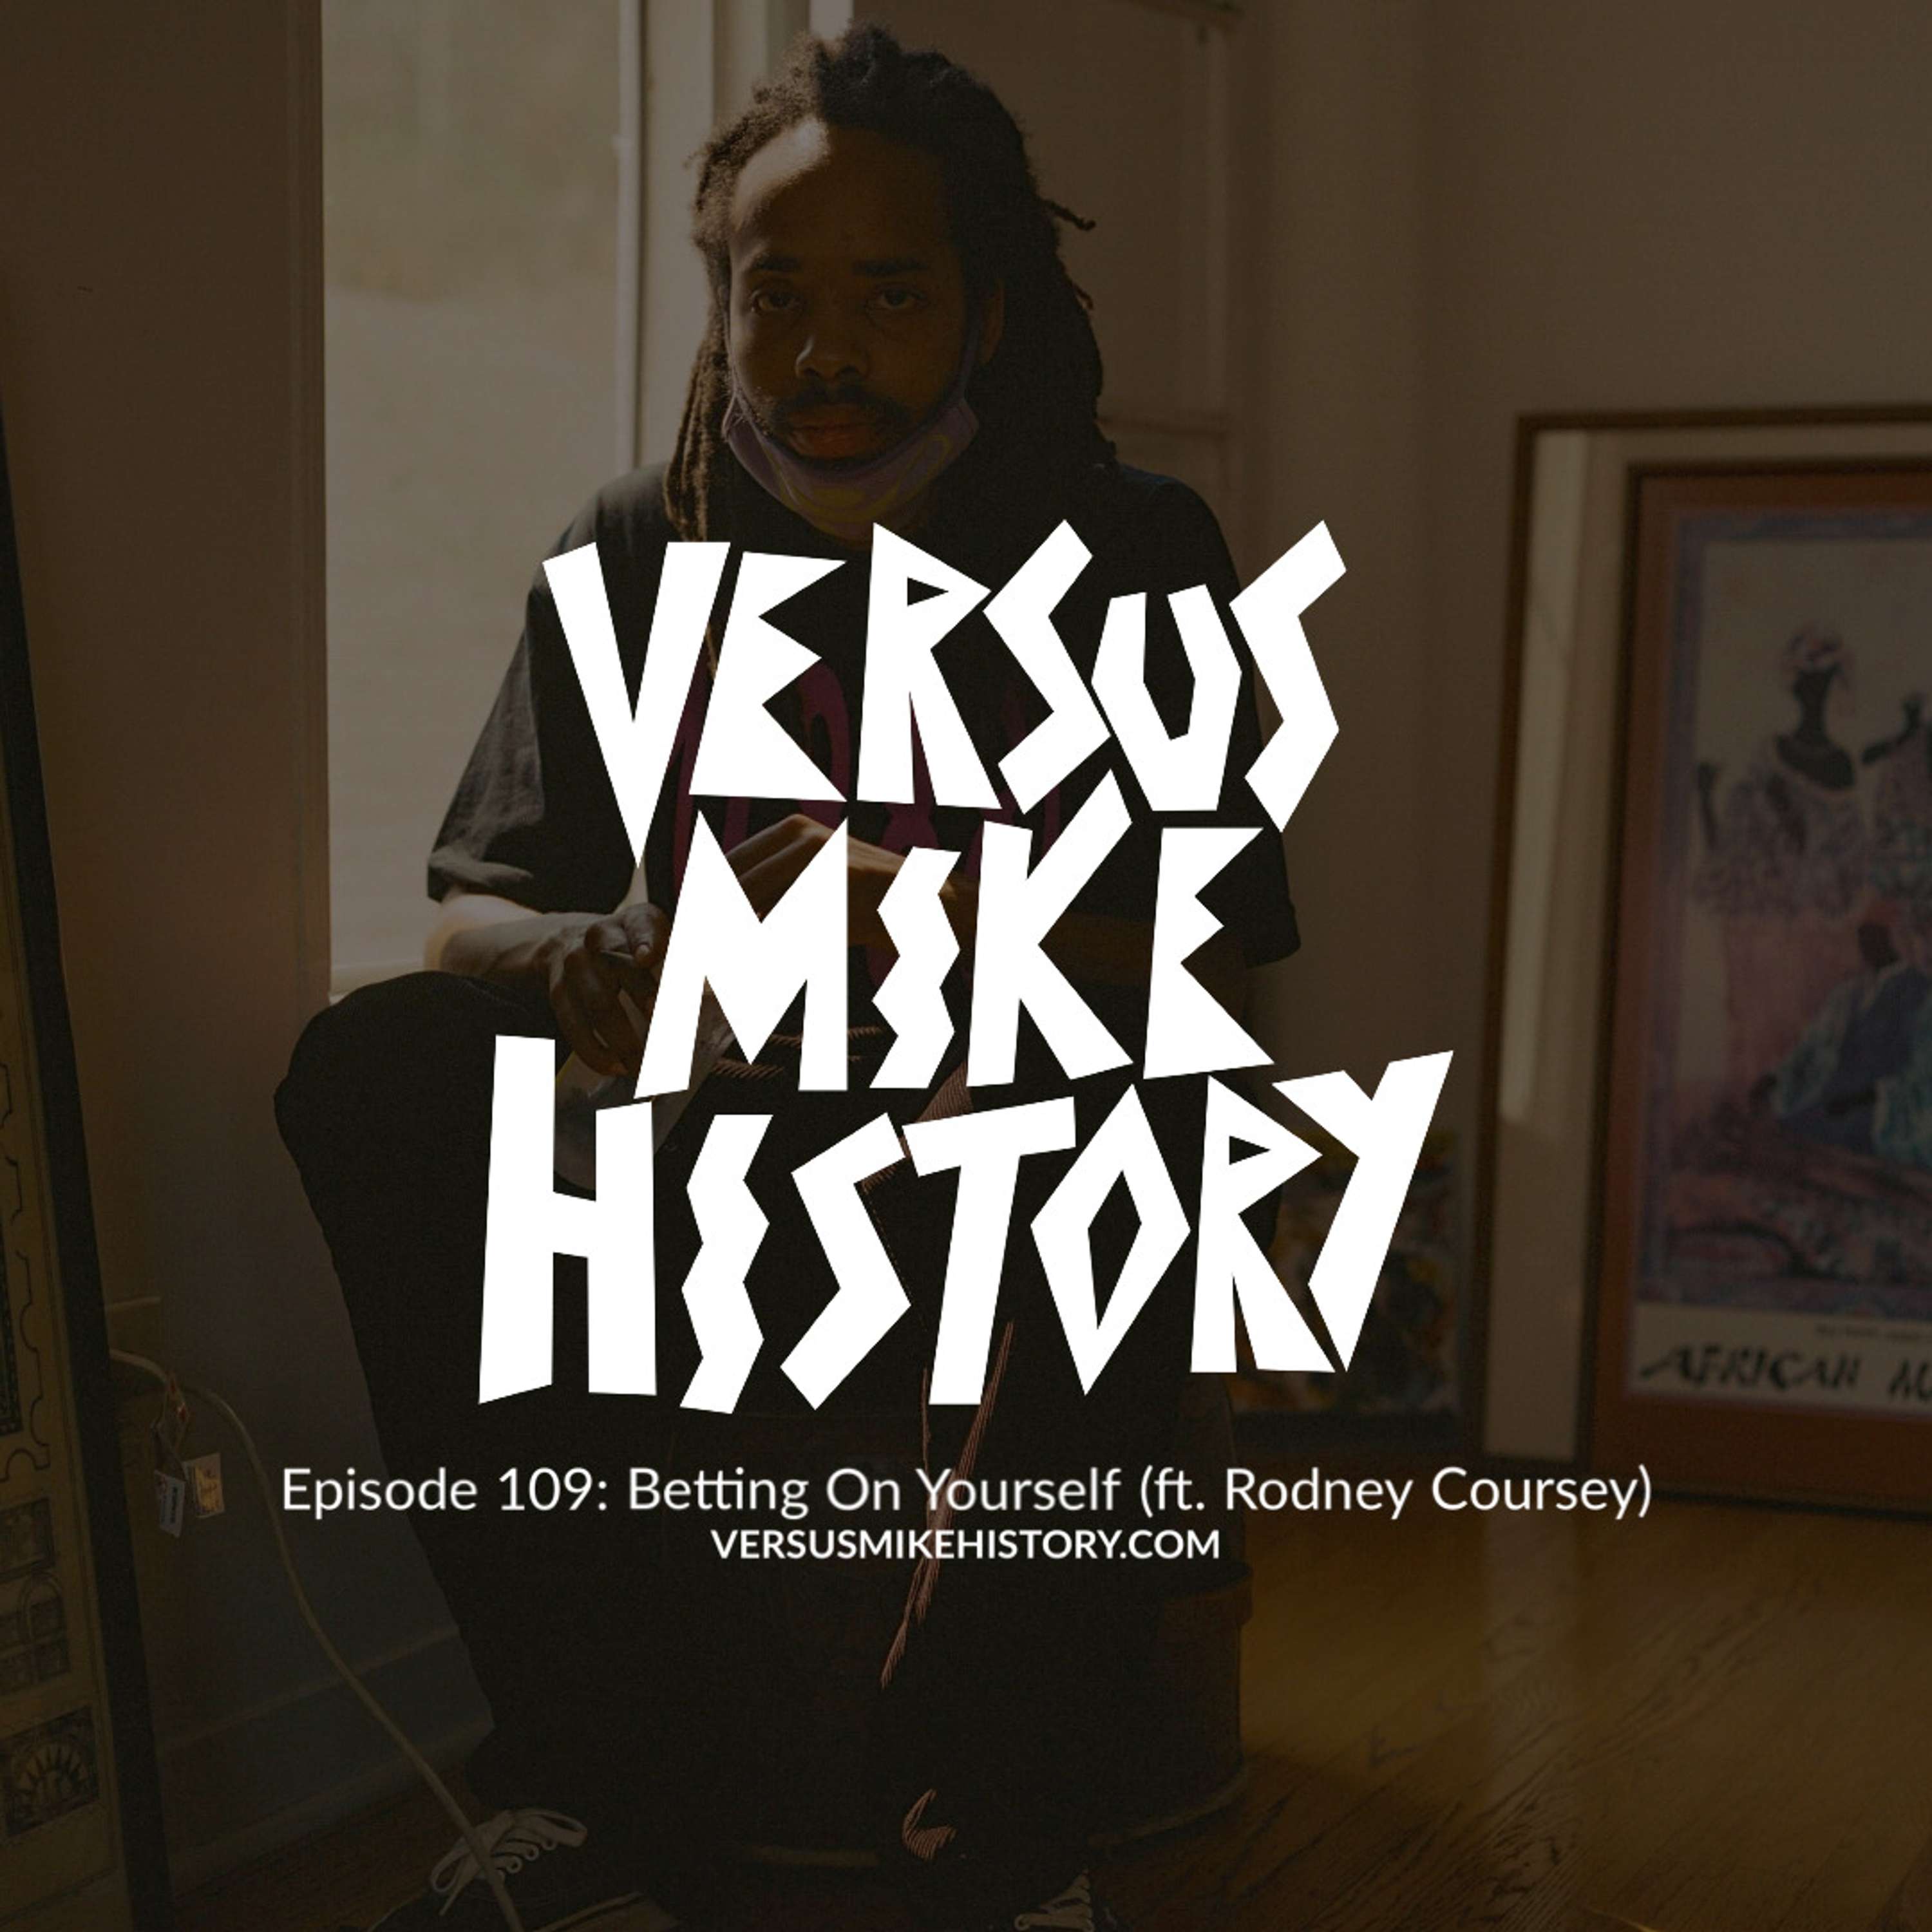 Episode 109: Betting On Yourself (ft. Rodney Coursey)